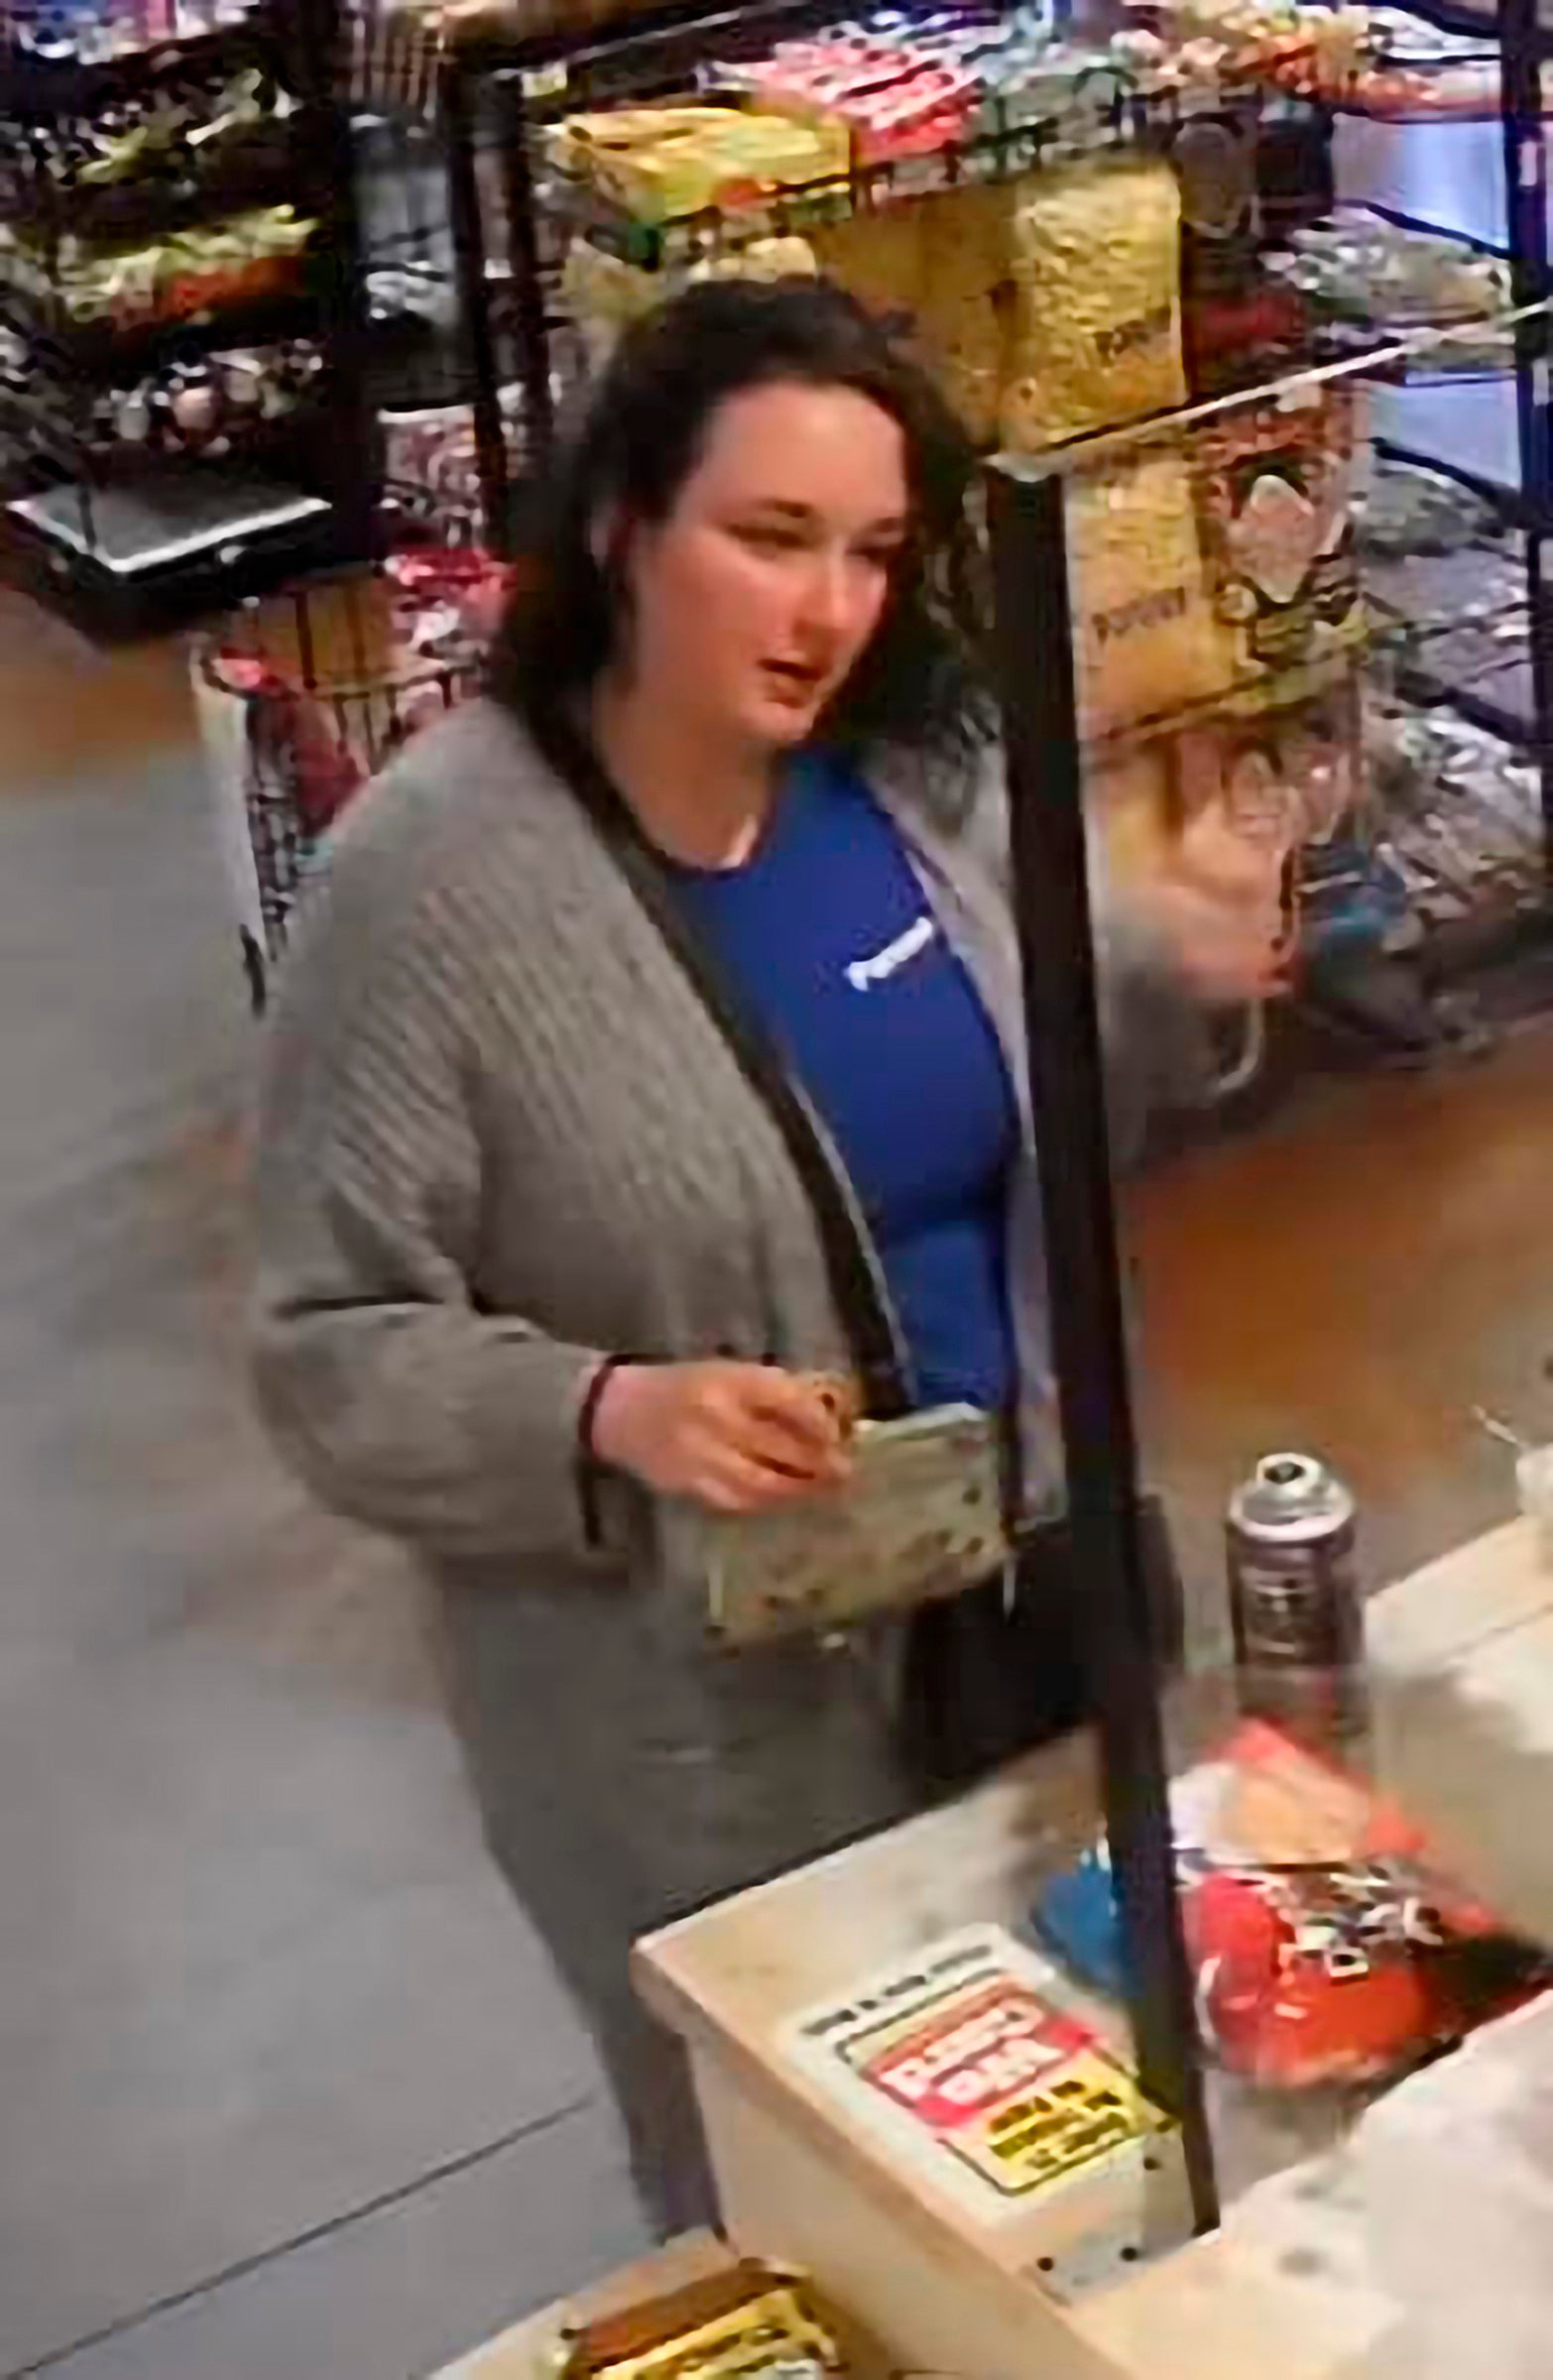 Naomi Irion was seen in surveillance footage on 12 March before she went missing